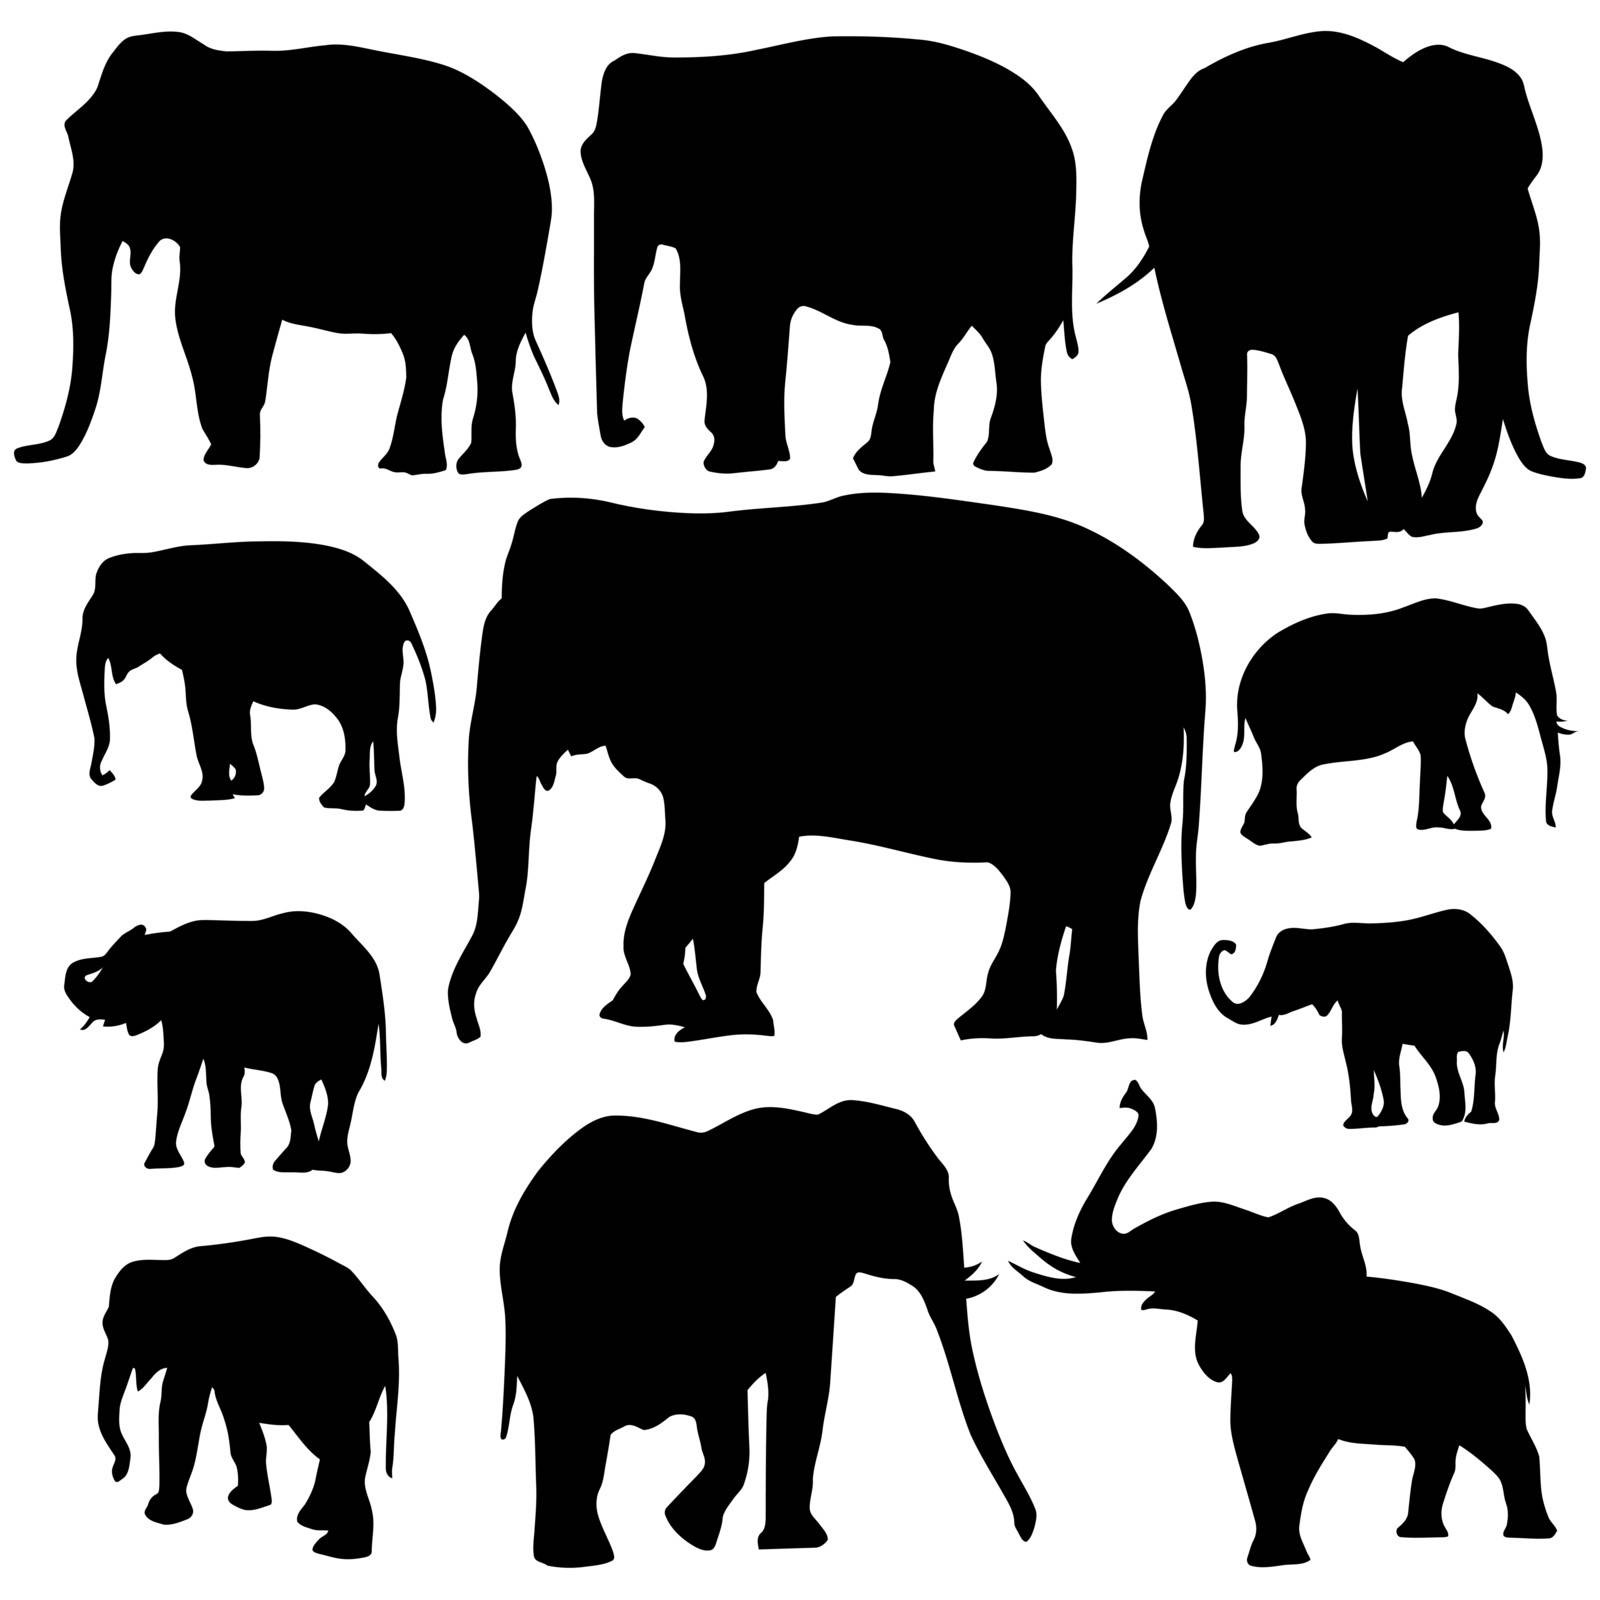 Vector illustration of Elephant silhouettes on white background